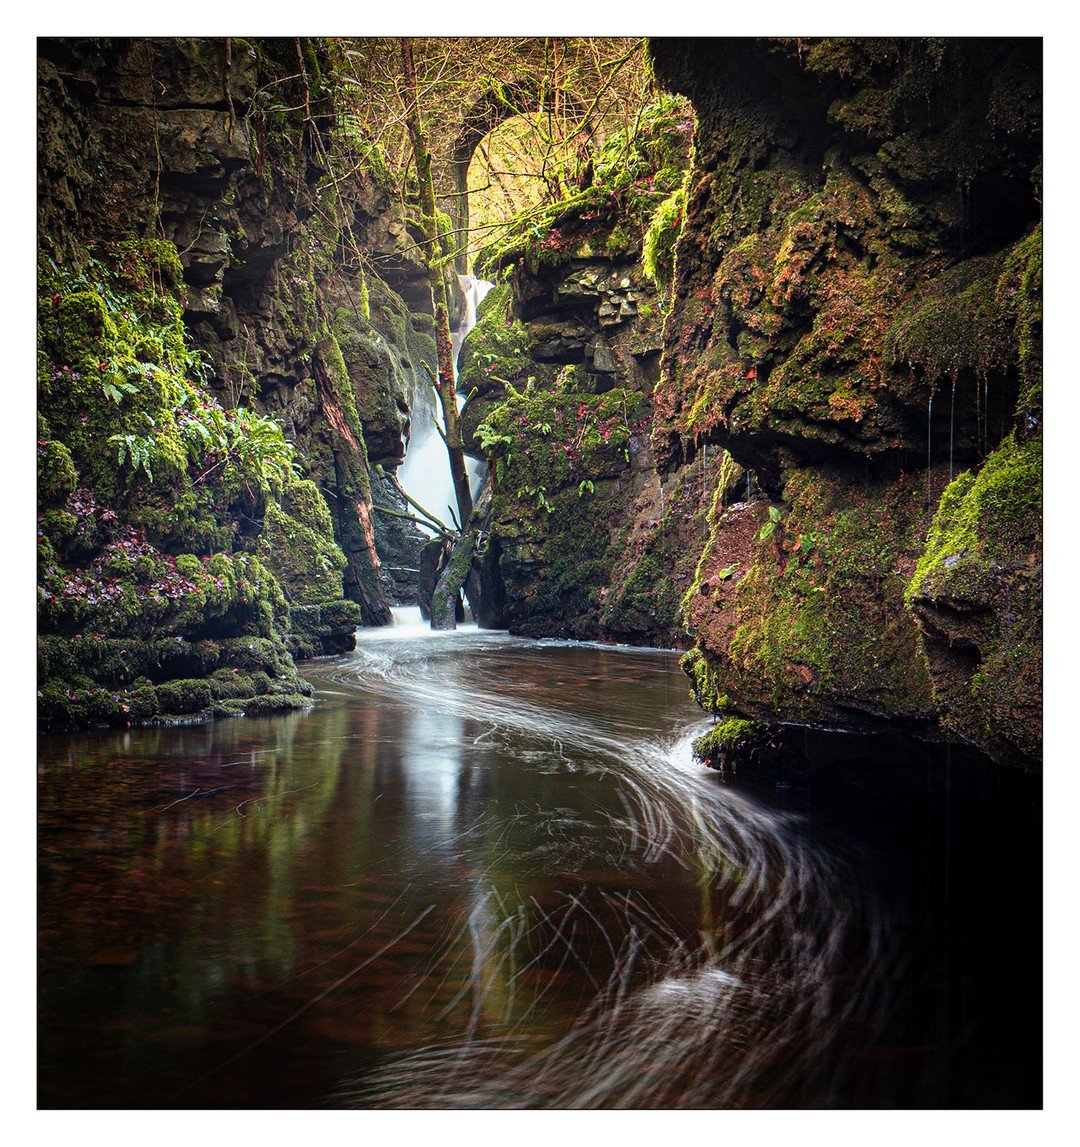 The stunning Devil's Bridge at Clydach Gorge in north-west Monmouthshire (near Abergavenny). The gorge is a true hidden gem, once full of industry but now an idyllic valley of beech woods, ponds, waterfalls and wildlife. #lovemonmouthshire